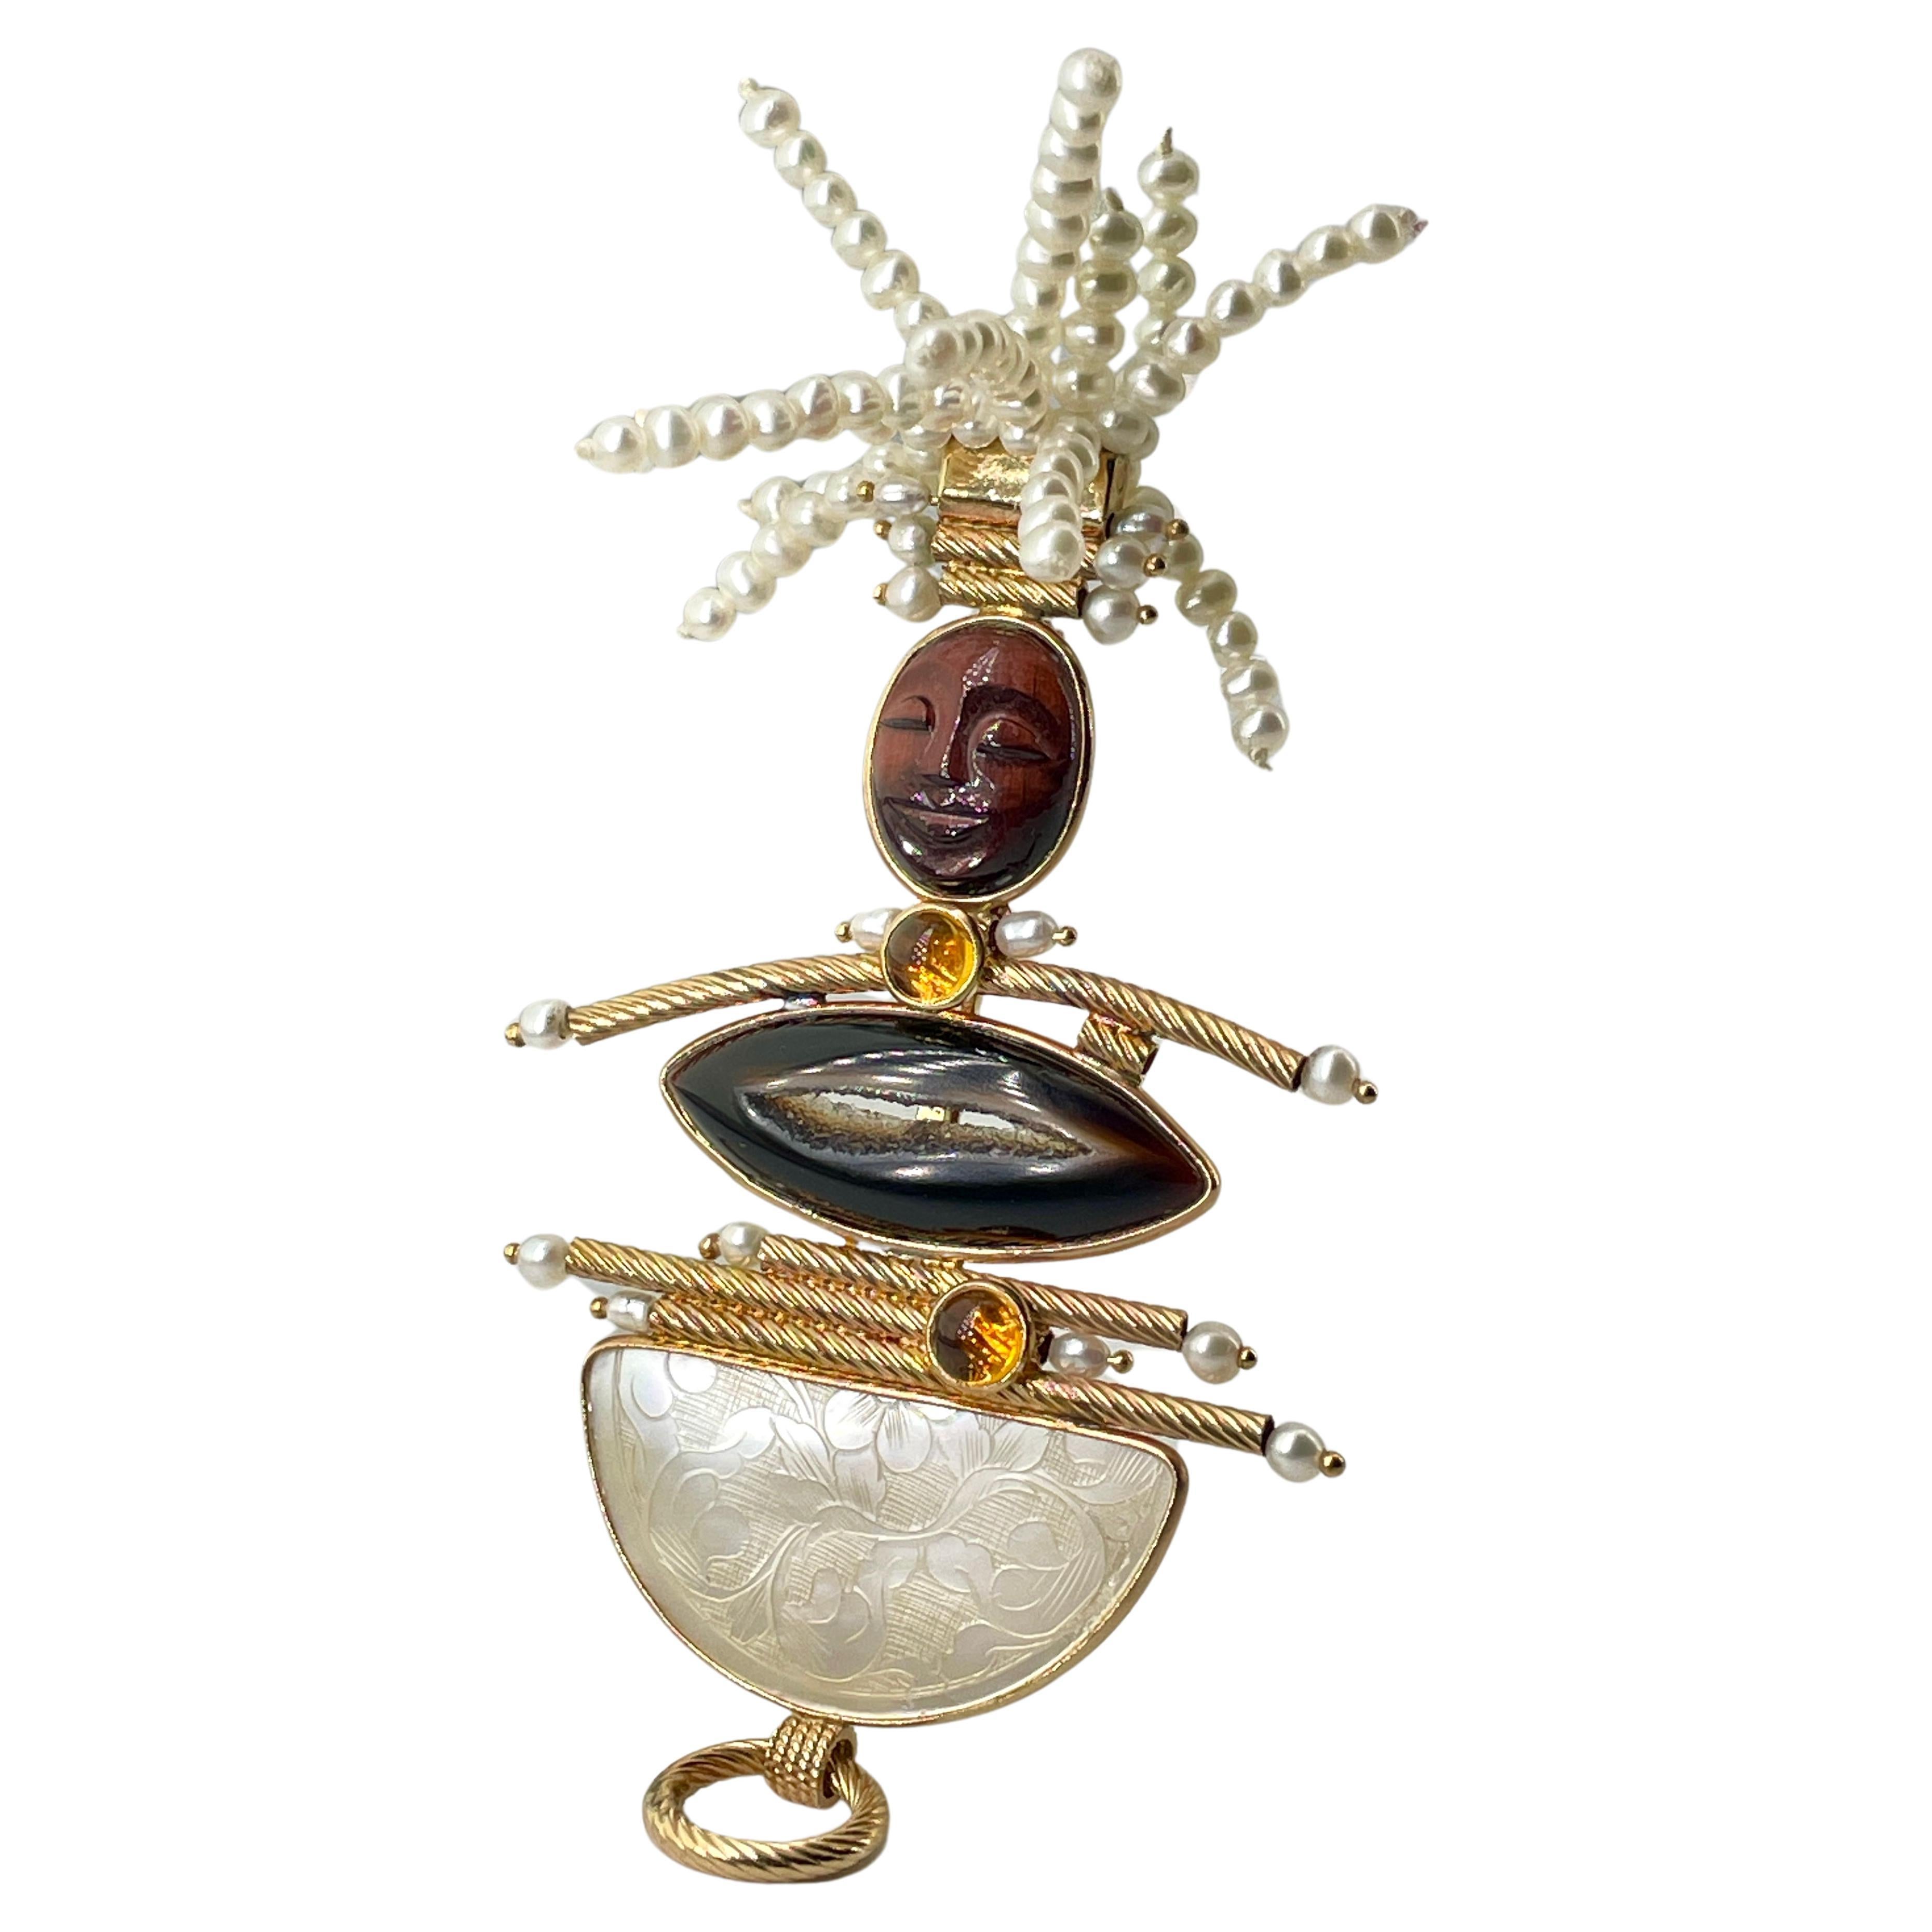 Contemporary Pin/Pendant. 14K Gold & Antique Mother-of-Pearl, Chinese Gambling Chip Pin, and Combination Enhancer. Hand-carved tiger-eye face, headdress of Citrine diamond-cut beads. She's also adorned with Citrine cabochon and Geode Quartz Agate.